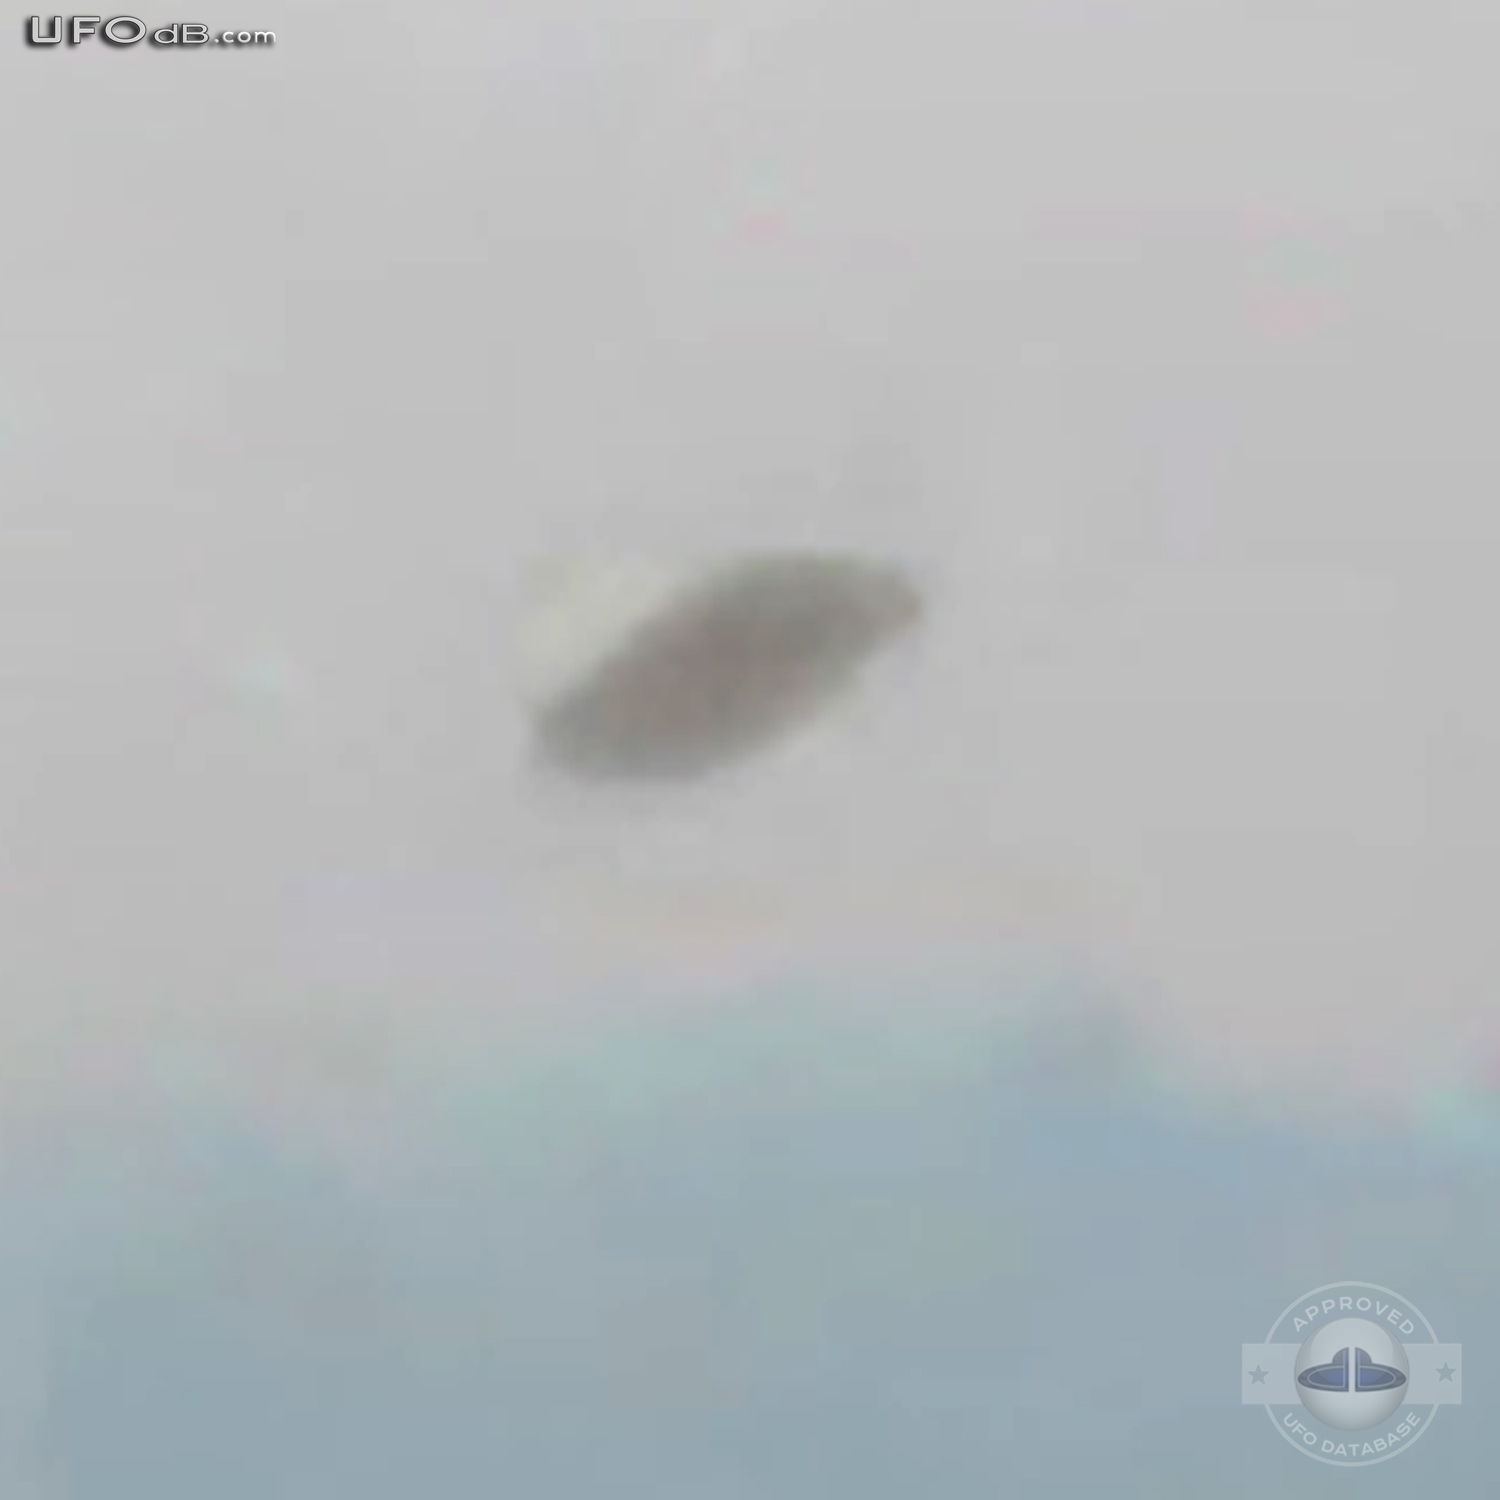 Humming whirring sounds heard with UFO picture | Hangzhou | April 2011 UFO Picture #332-6